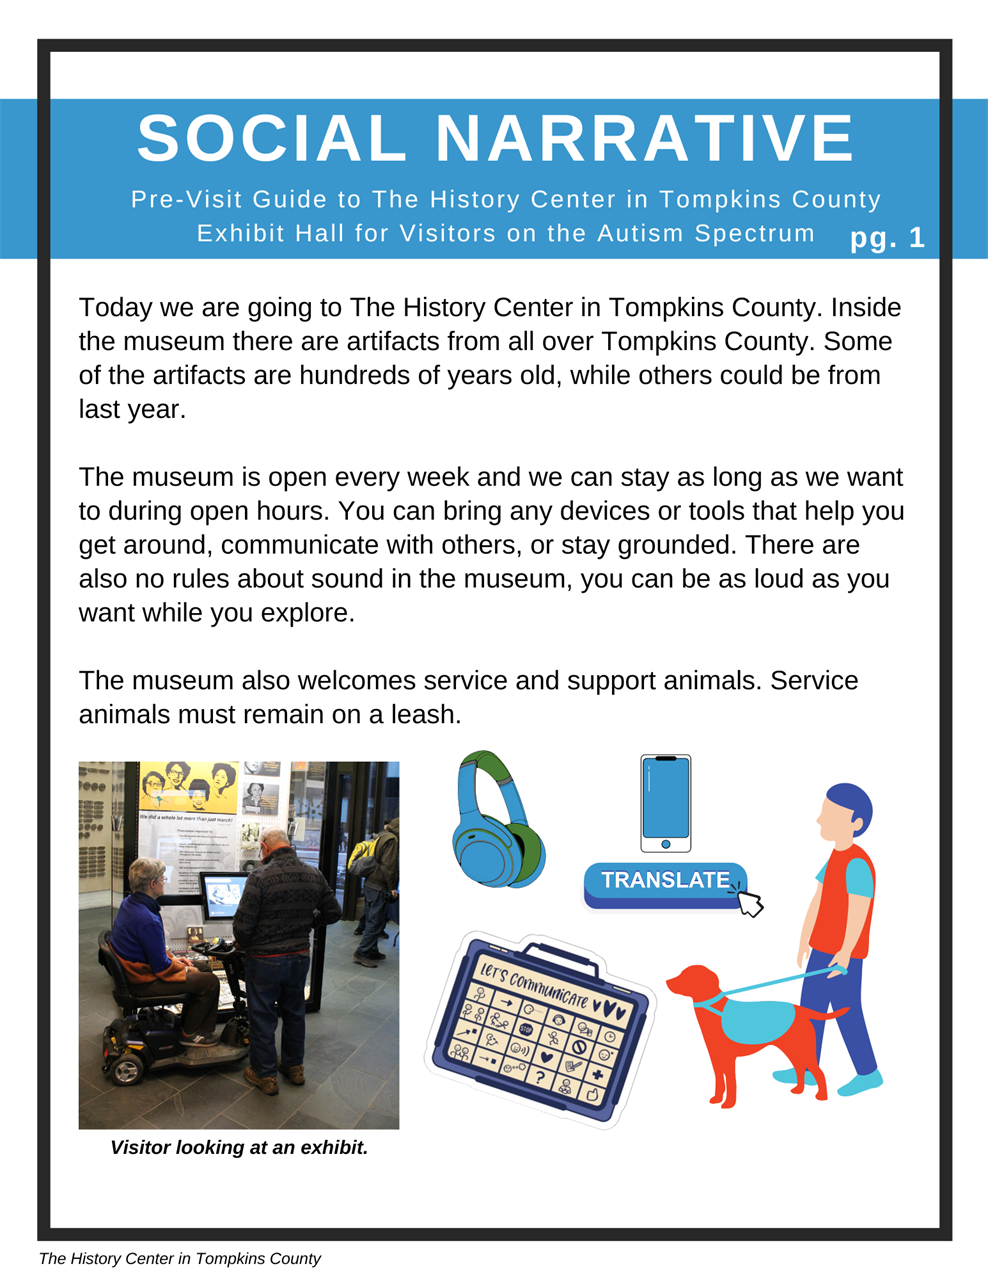 Flyer with images of a person on a wheelchair in the exhibit hall, a guide dog, headphones, a button that reads ‘Translate”, and a communication tablet. Text in blue box reads “Social Narrative: Pre-visit Guide to the History Center in Tompkins County Exhibit Hall for Visitors on the Autism Spectrum”